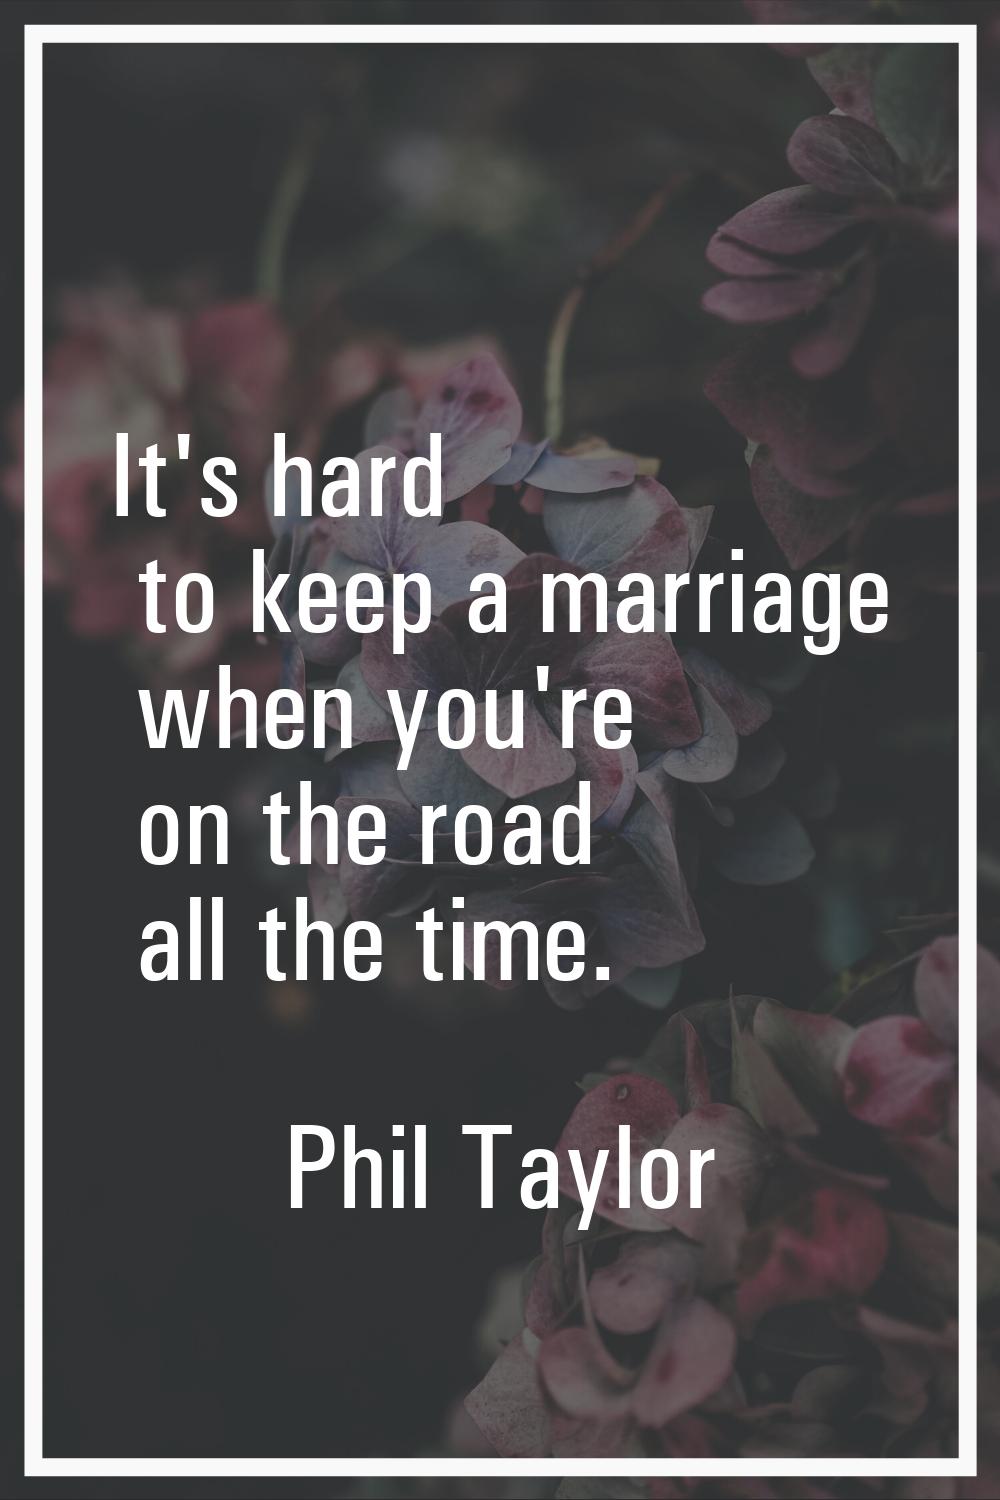 It's hard to keep a marriage when you're on the road all the time.